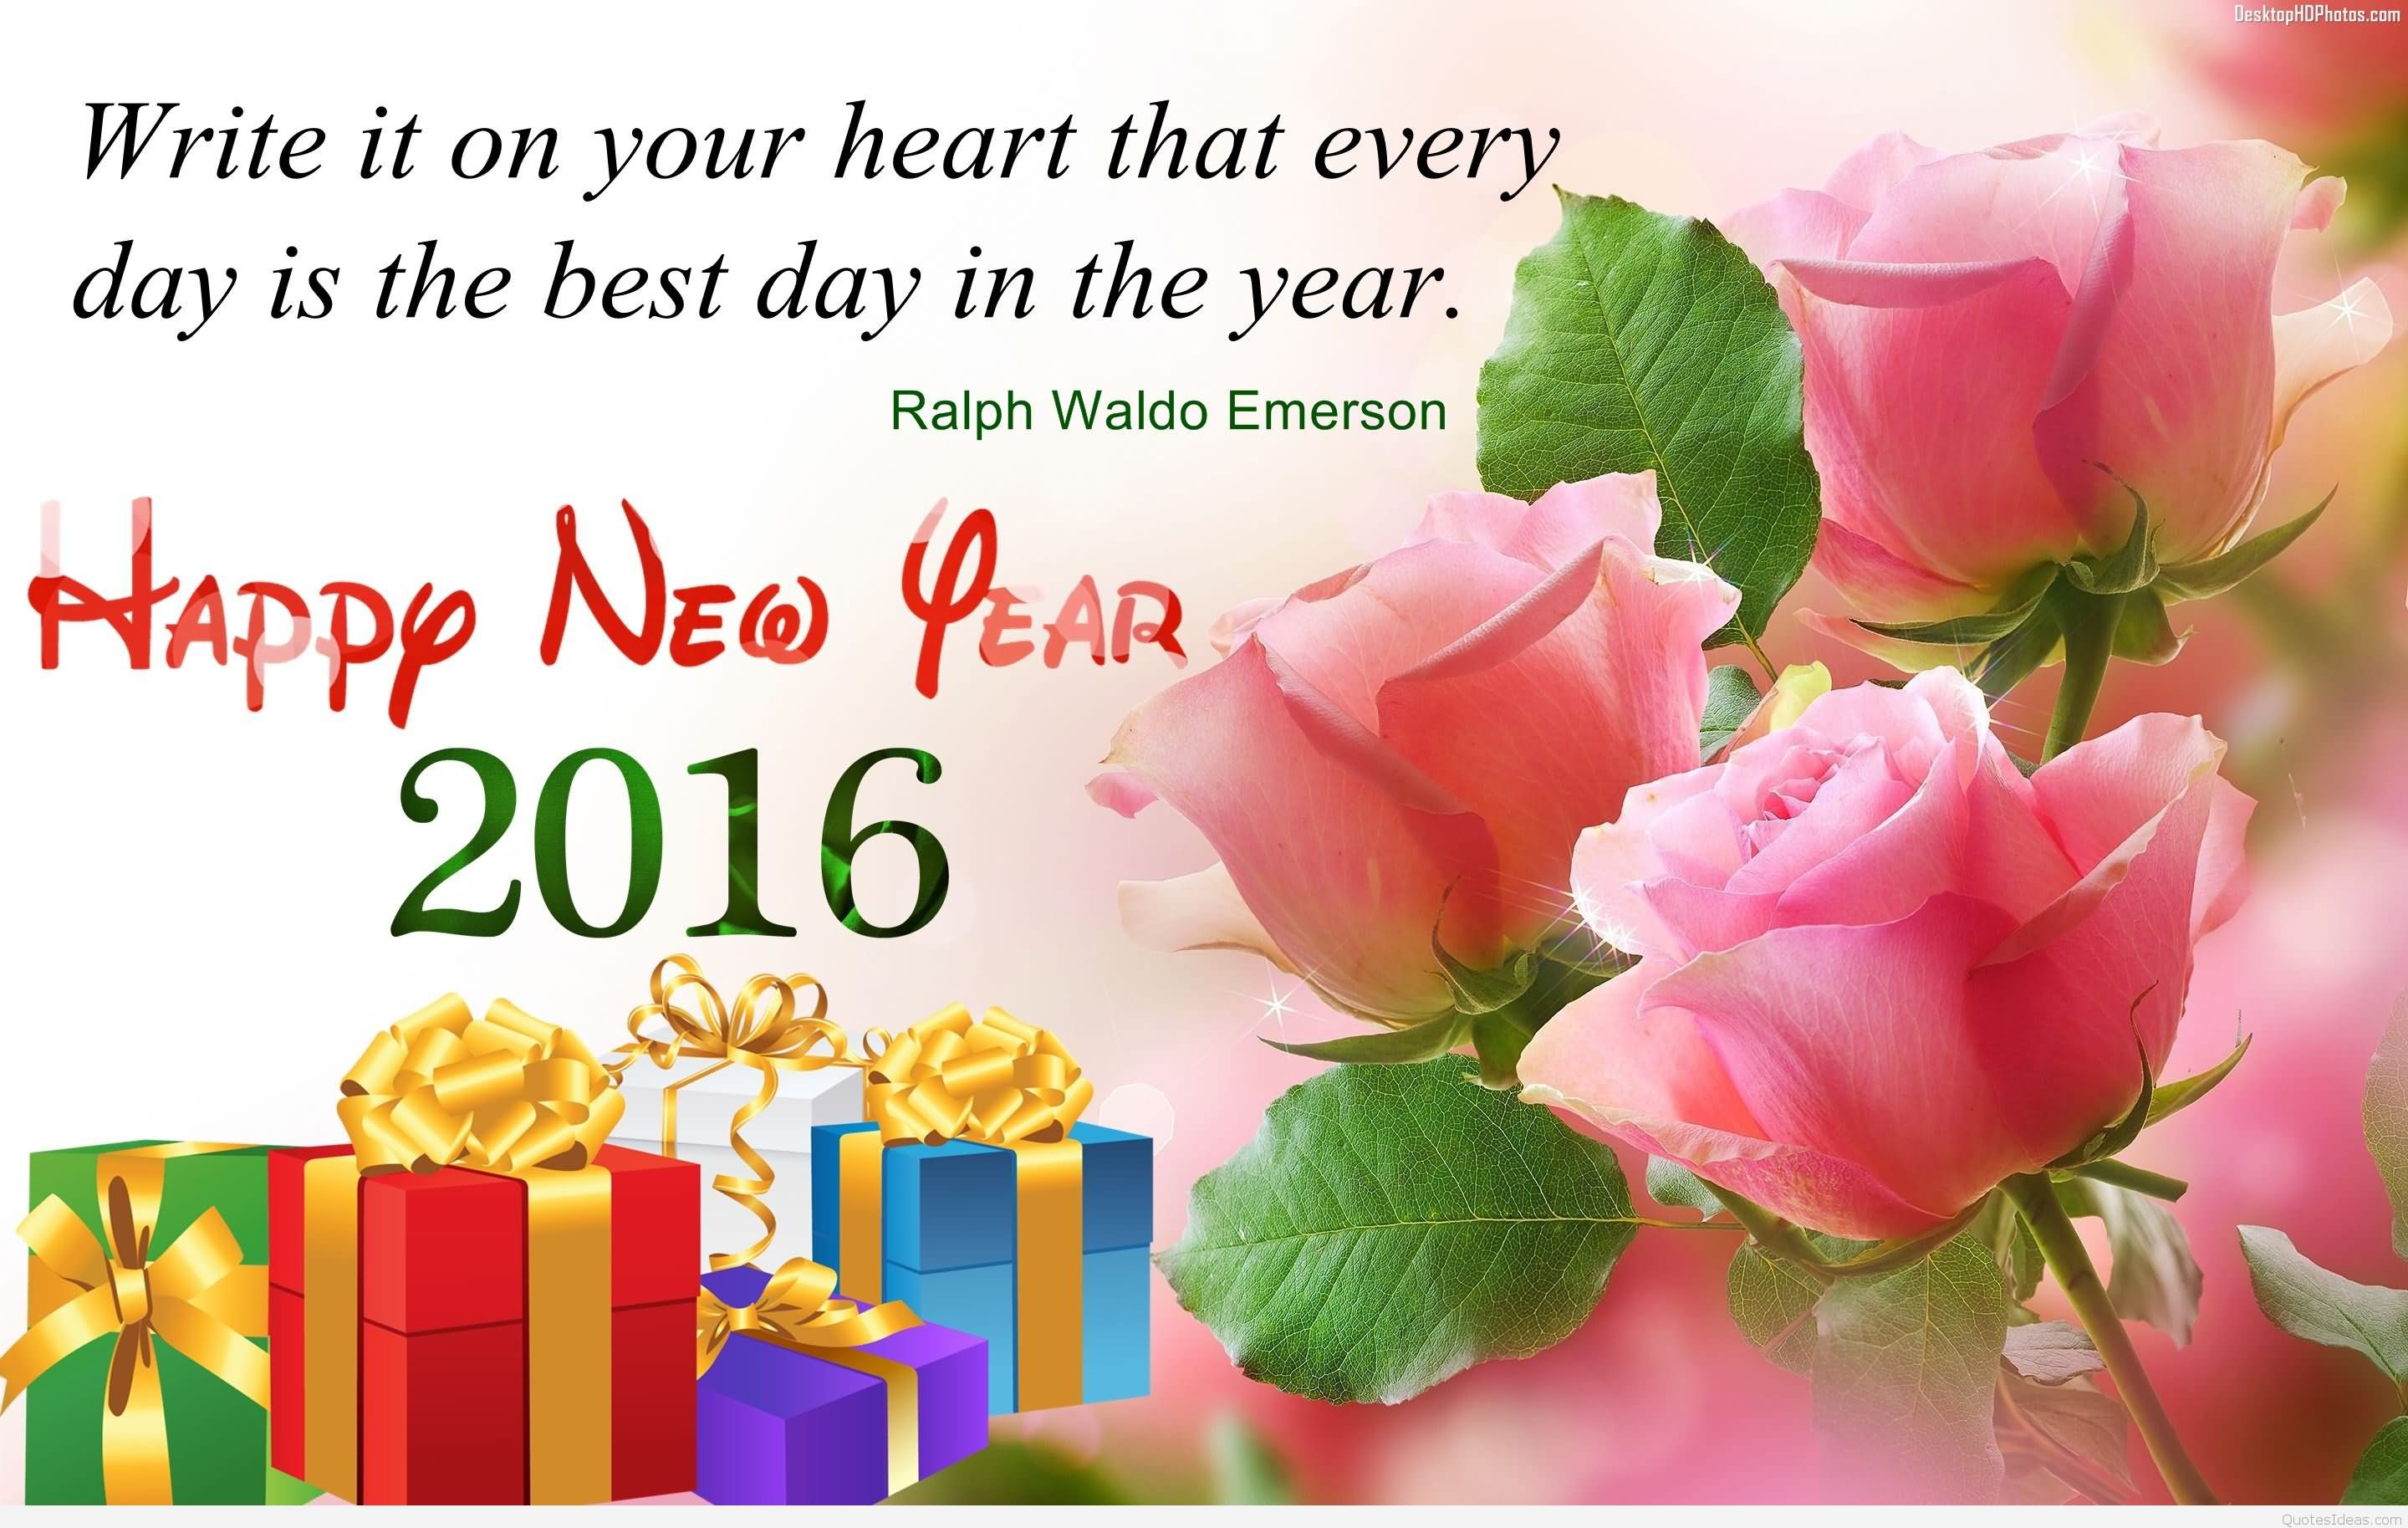 Happy New Year 2016 Wishes Picture